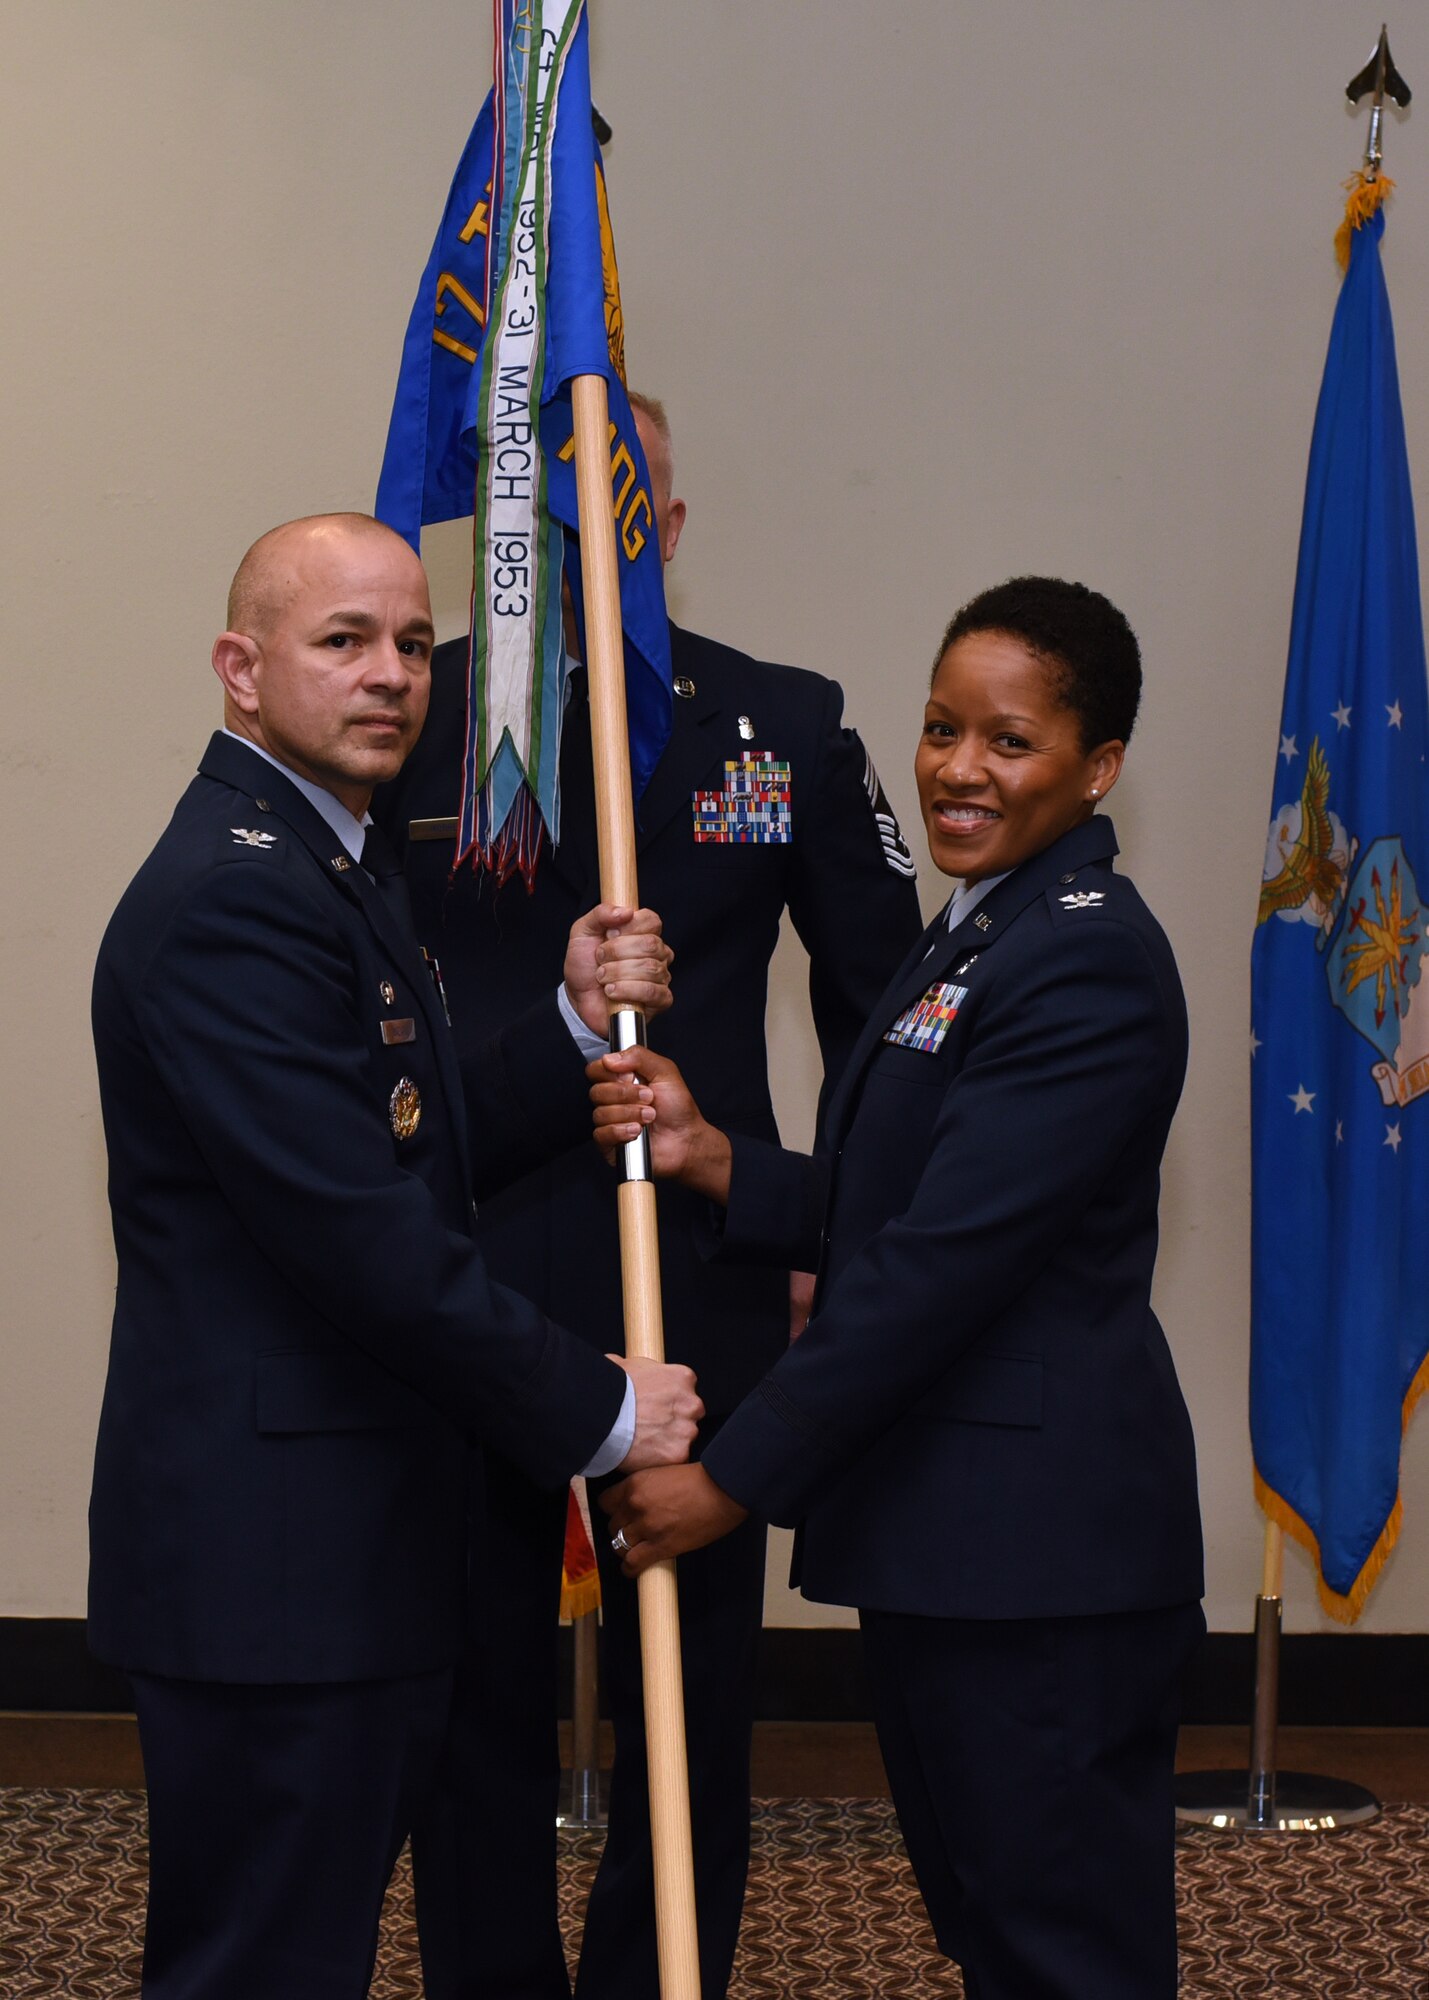 U.S. Air Force Col. Andres Nazario, 17th Training Wing commander, formally hands command to Col. Lauren Byrd, 17th Medical Group incoming commander, during the 17th MDG Change of Command Ceremony held at the event center on Goodfellow Air Force Base, Texas, July 8, 2019. Byrd was the 11th Medical Group Administrator at Joint Base Andrews, Maryland, prior to her current assignment at Goodfellow. (U.S. Air Force photo by Airman 1st Class Abbey Rieves/Released)